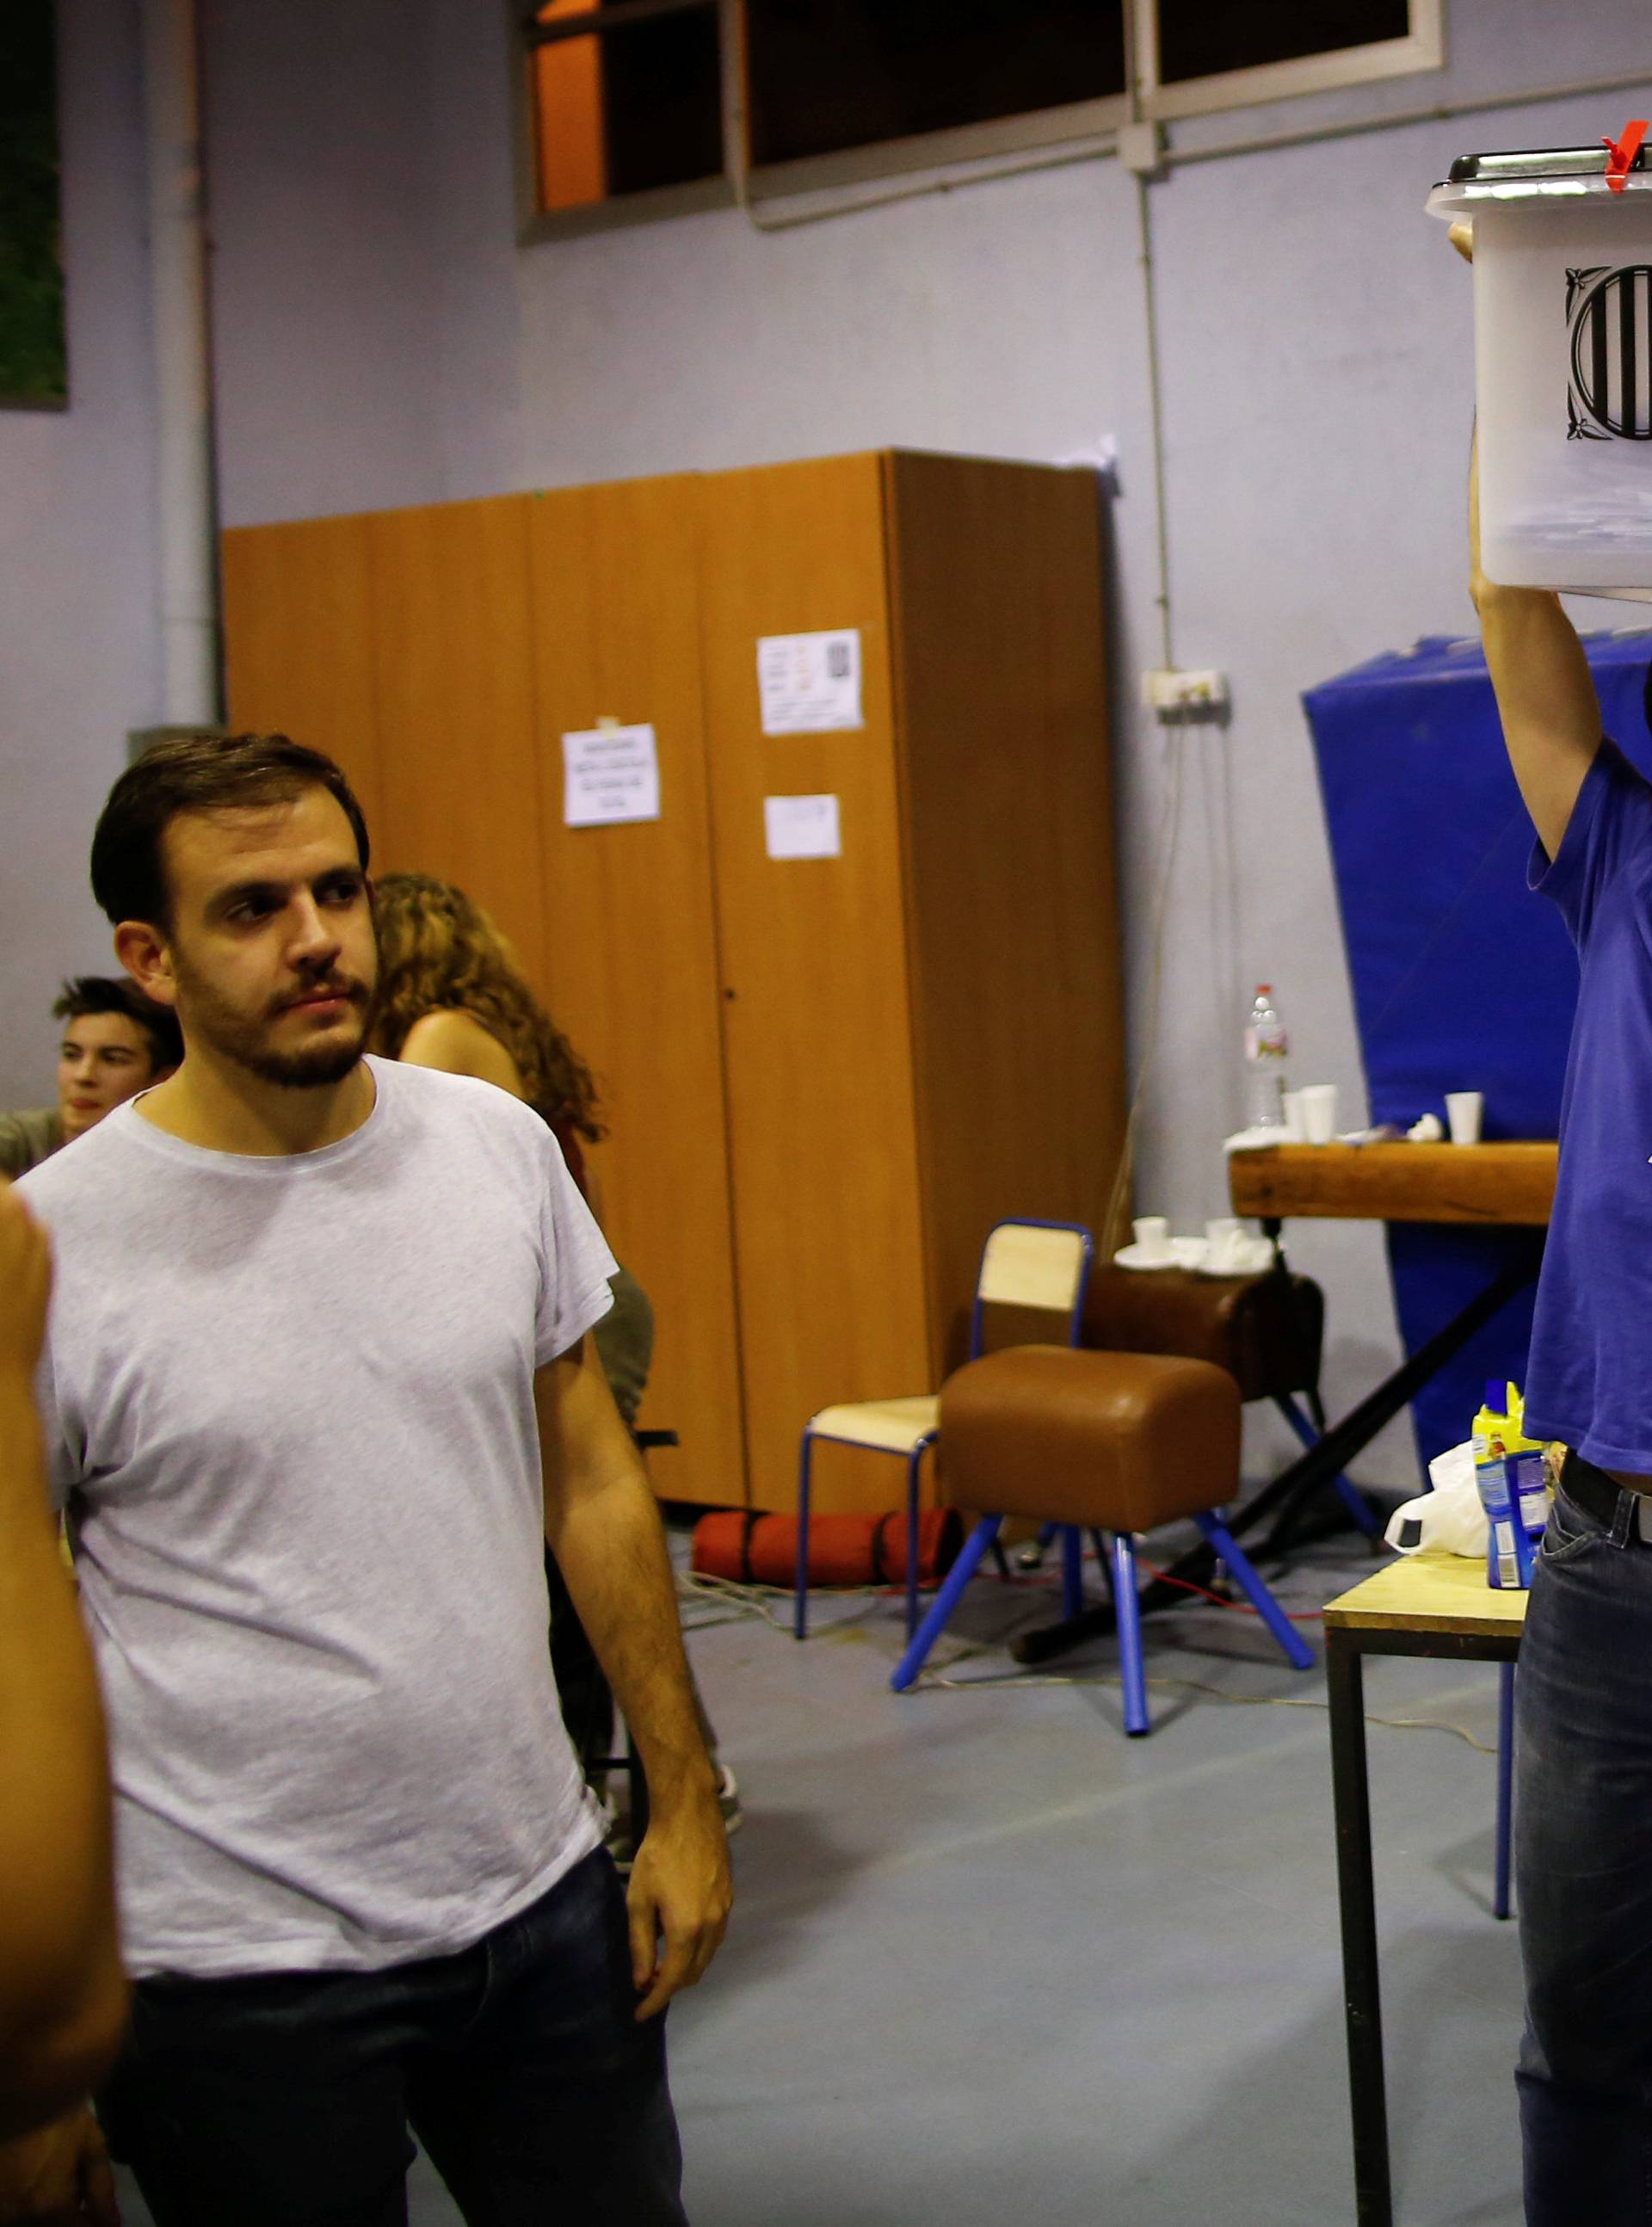 Poll workers celebrate after polls close at a polling station for the banned independence referendum in Barcelona